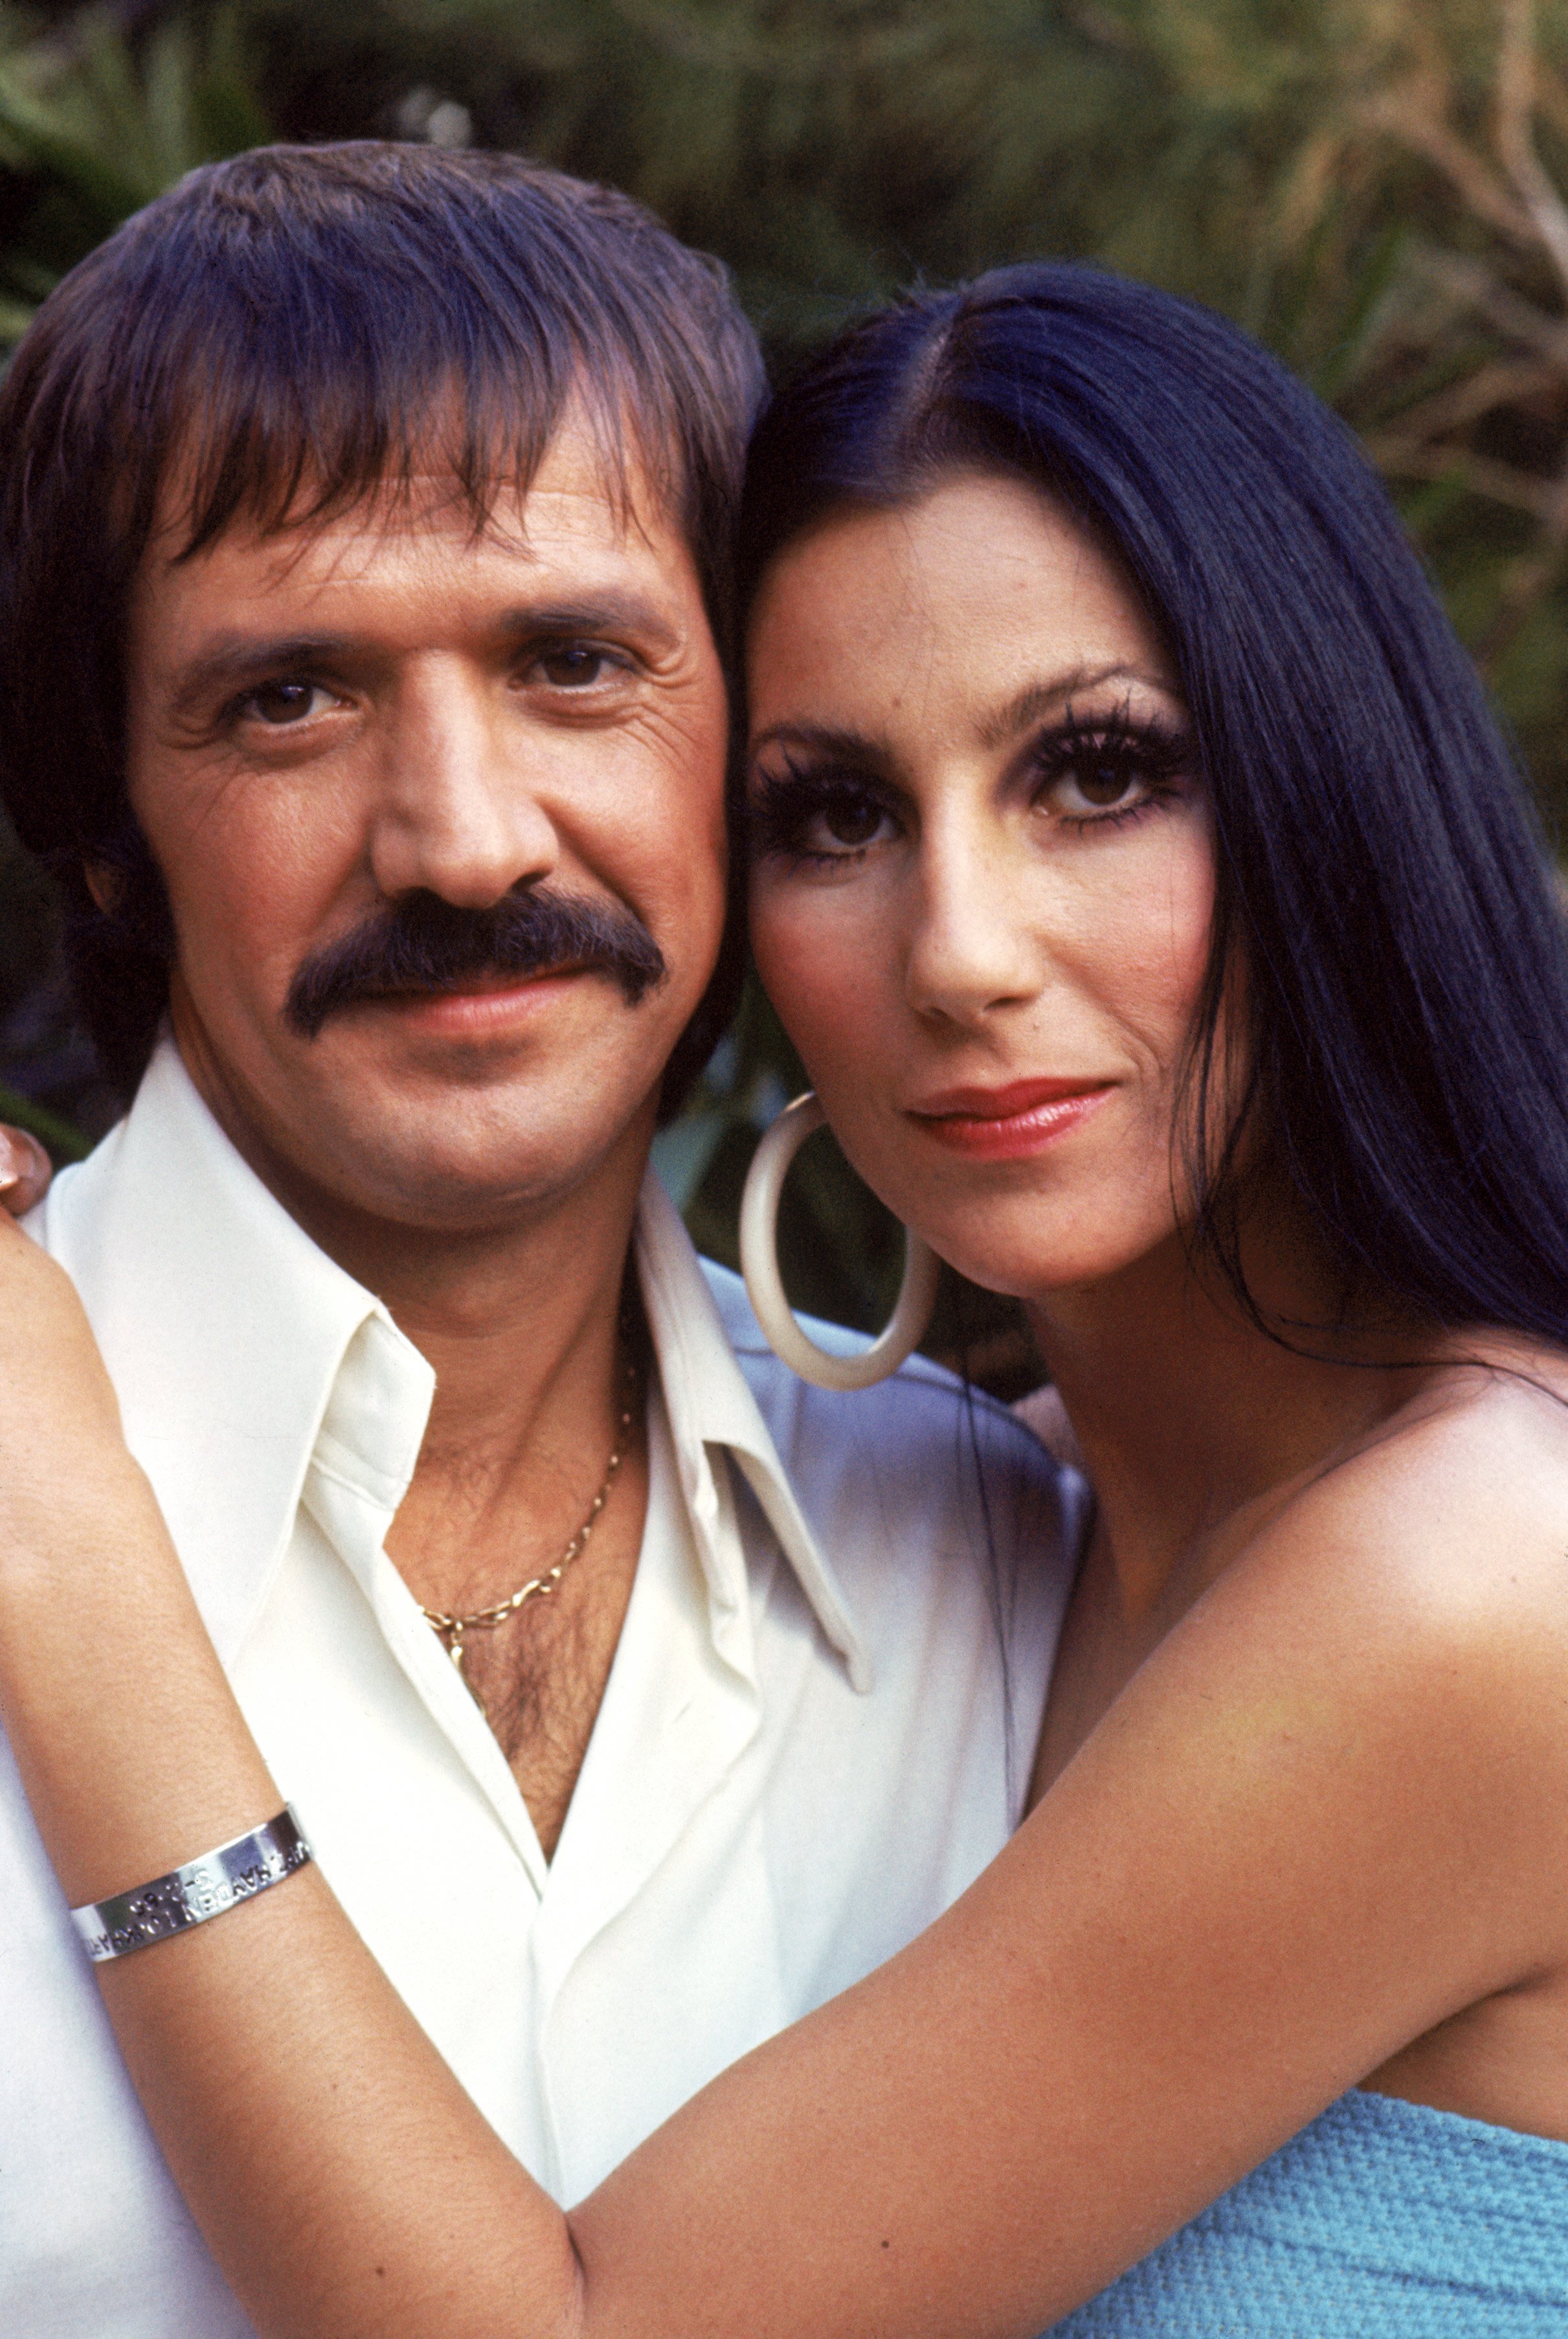 Cher and Sonny Bono pose for a promotional photo for "The Sonny and Cher Show" in 1970. | Source: Getty Images